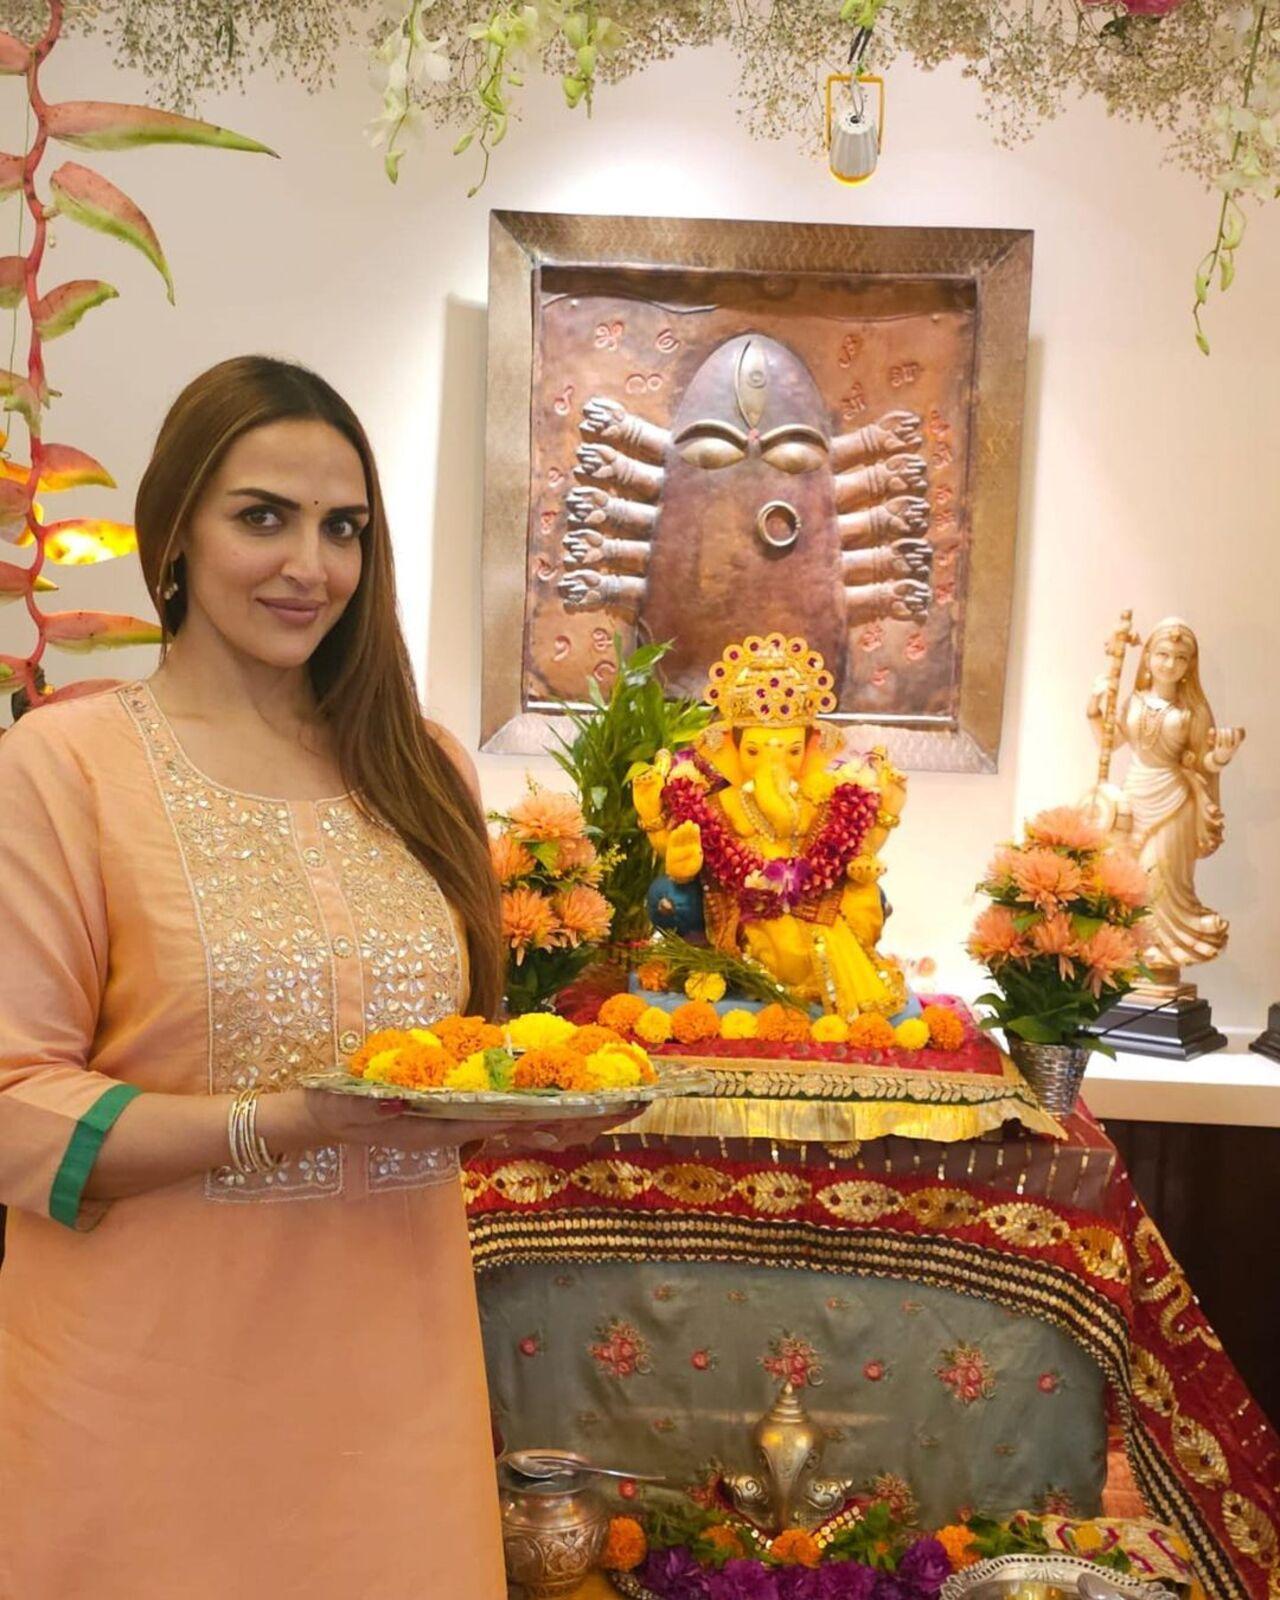 Esha Deol poses with the Ganesh idol at her home and wishes all her followers and fans on social media